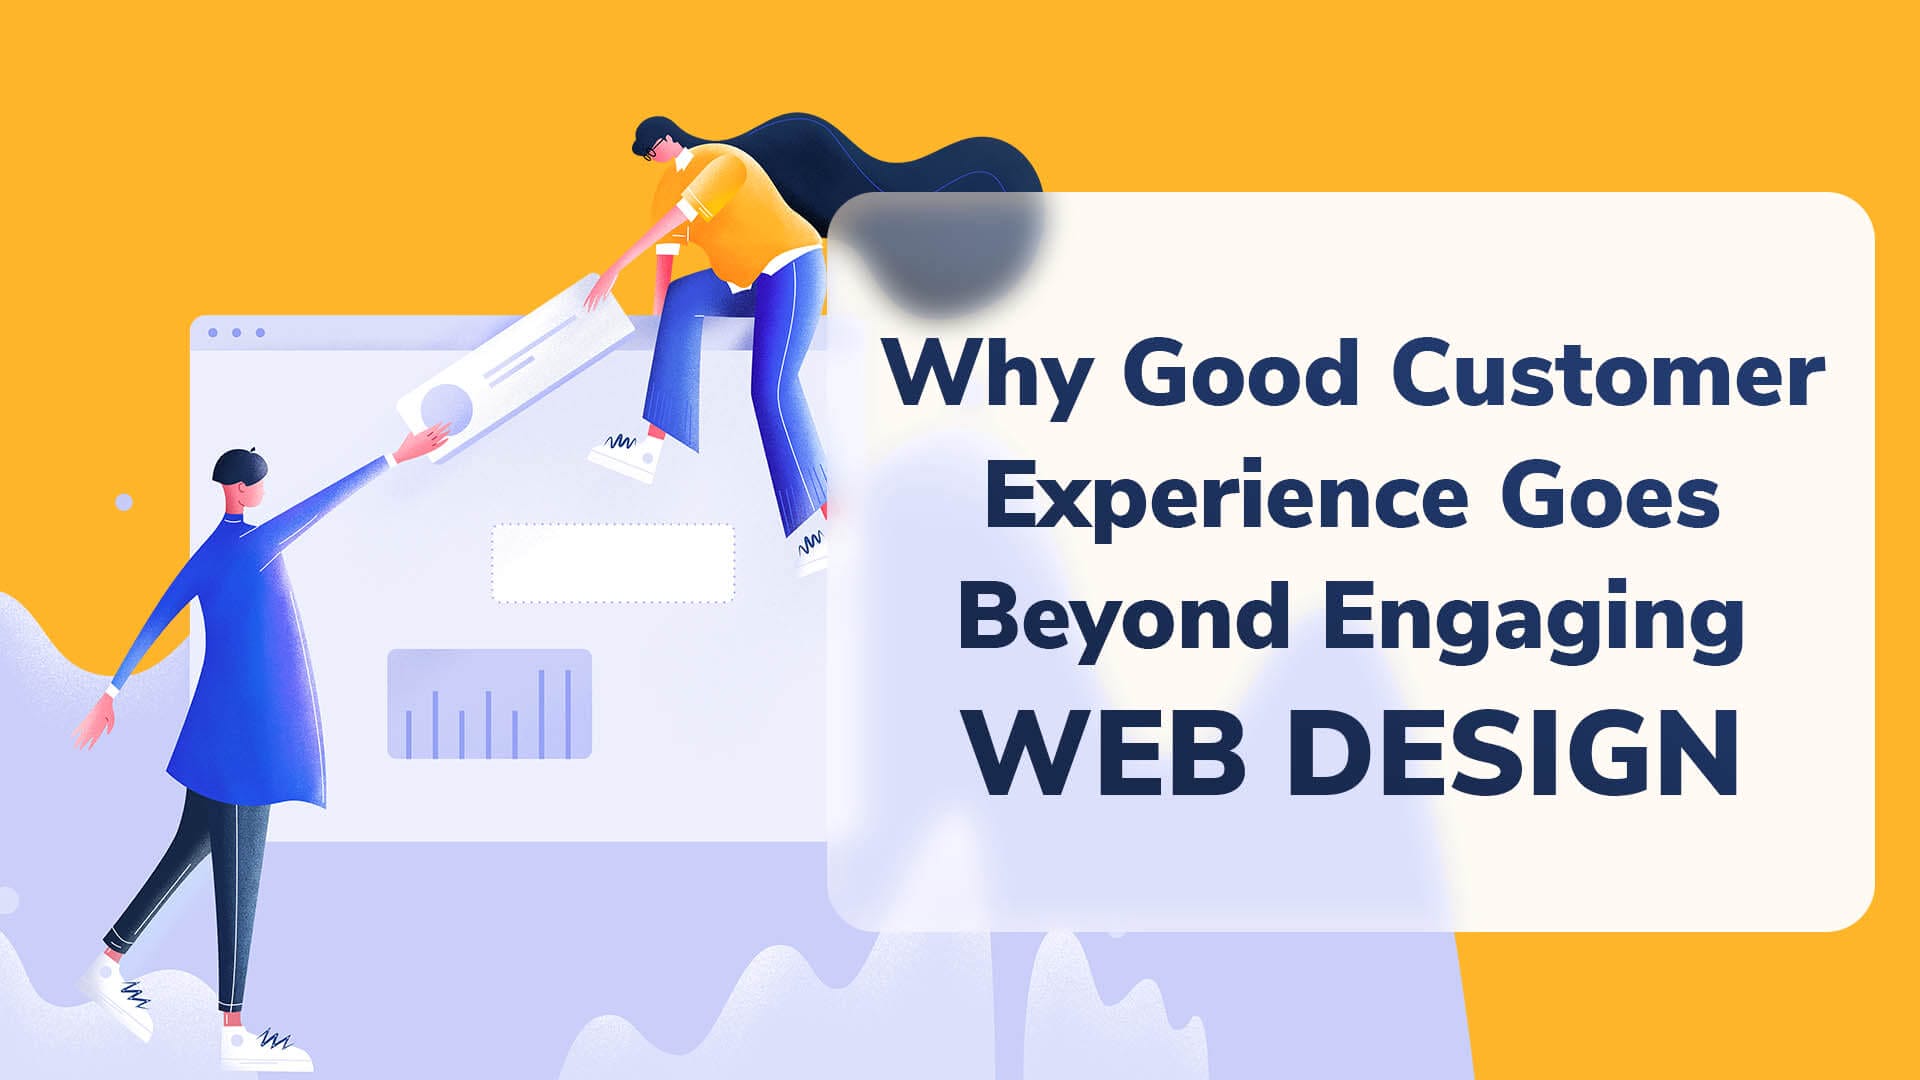 Why Good Customer Experience Goes Beyond Engaging Web Design